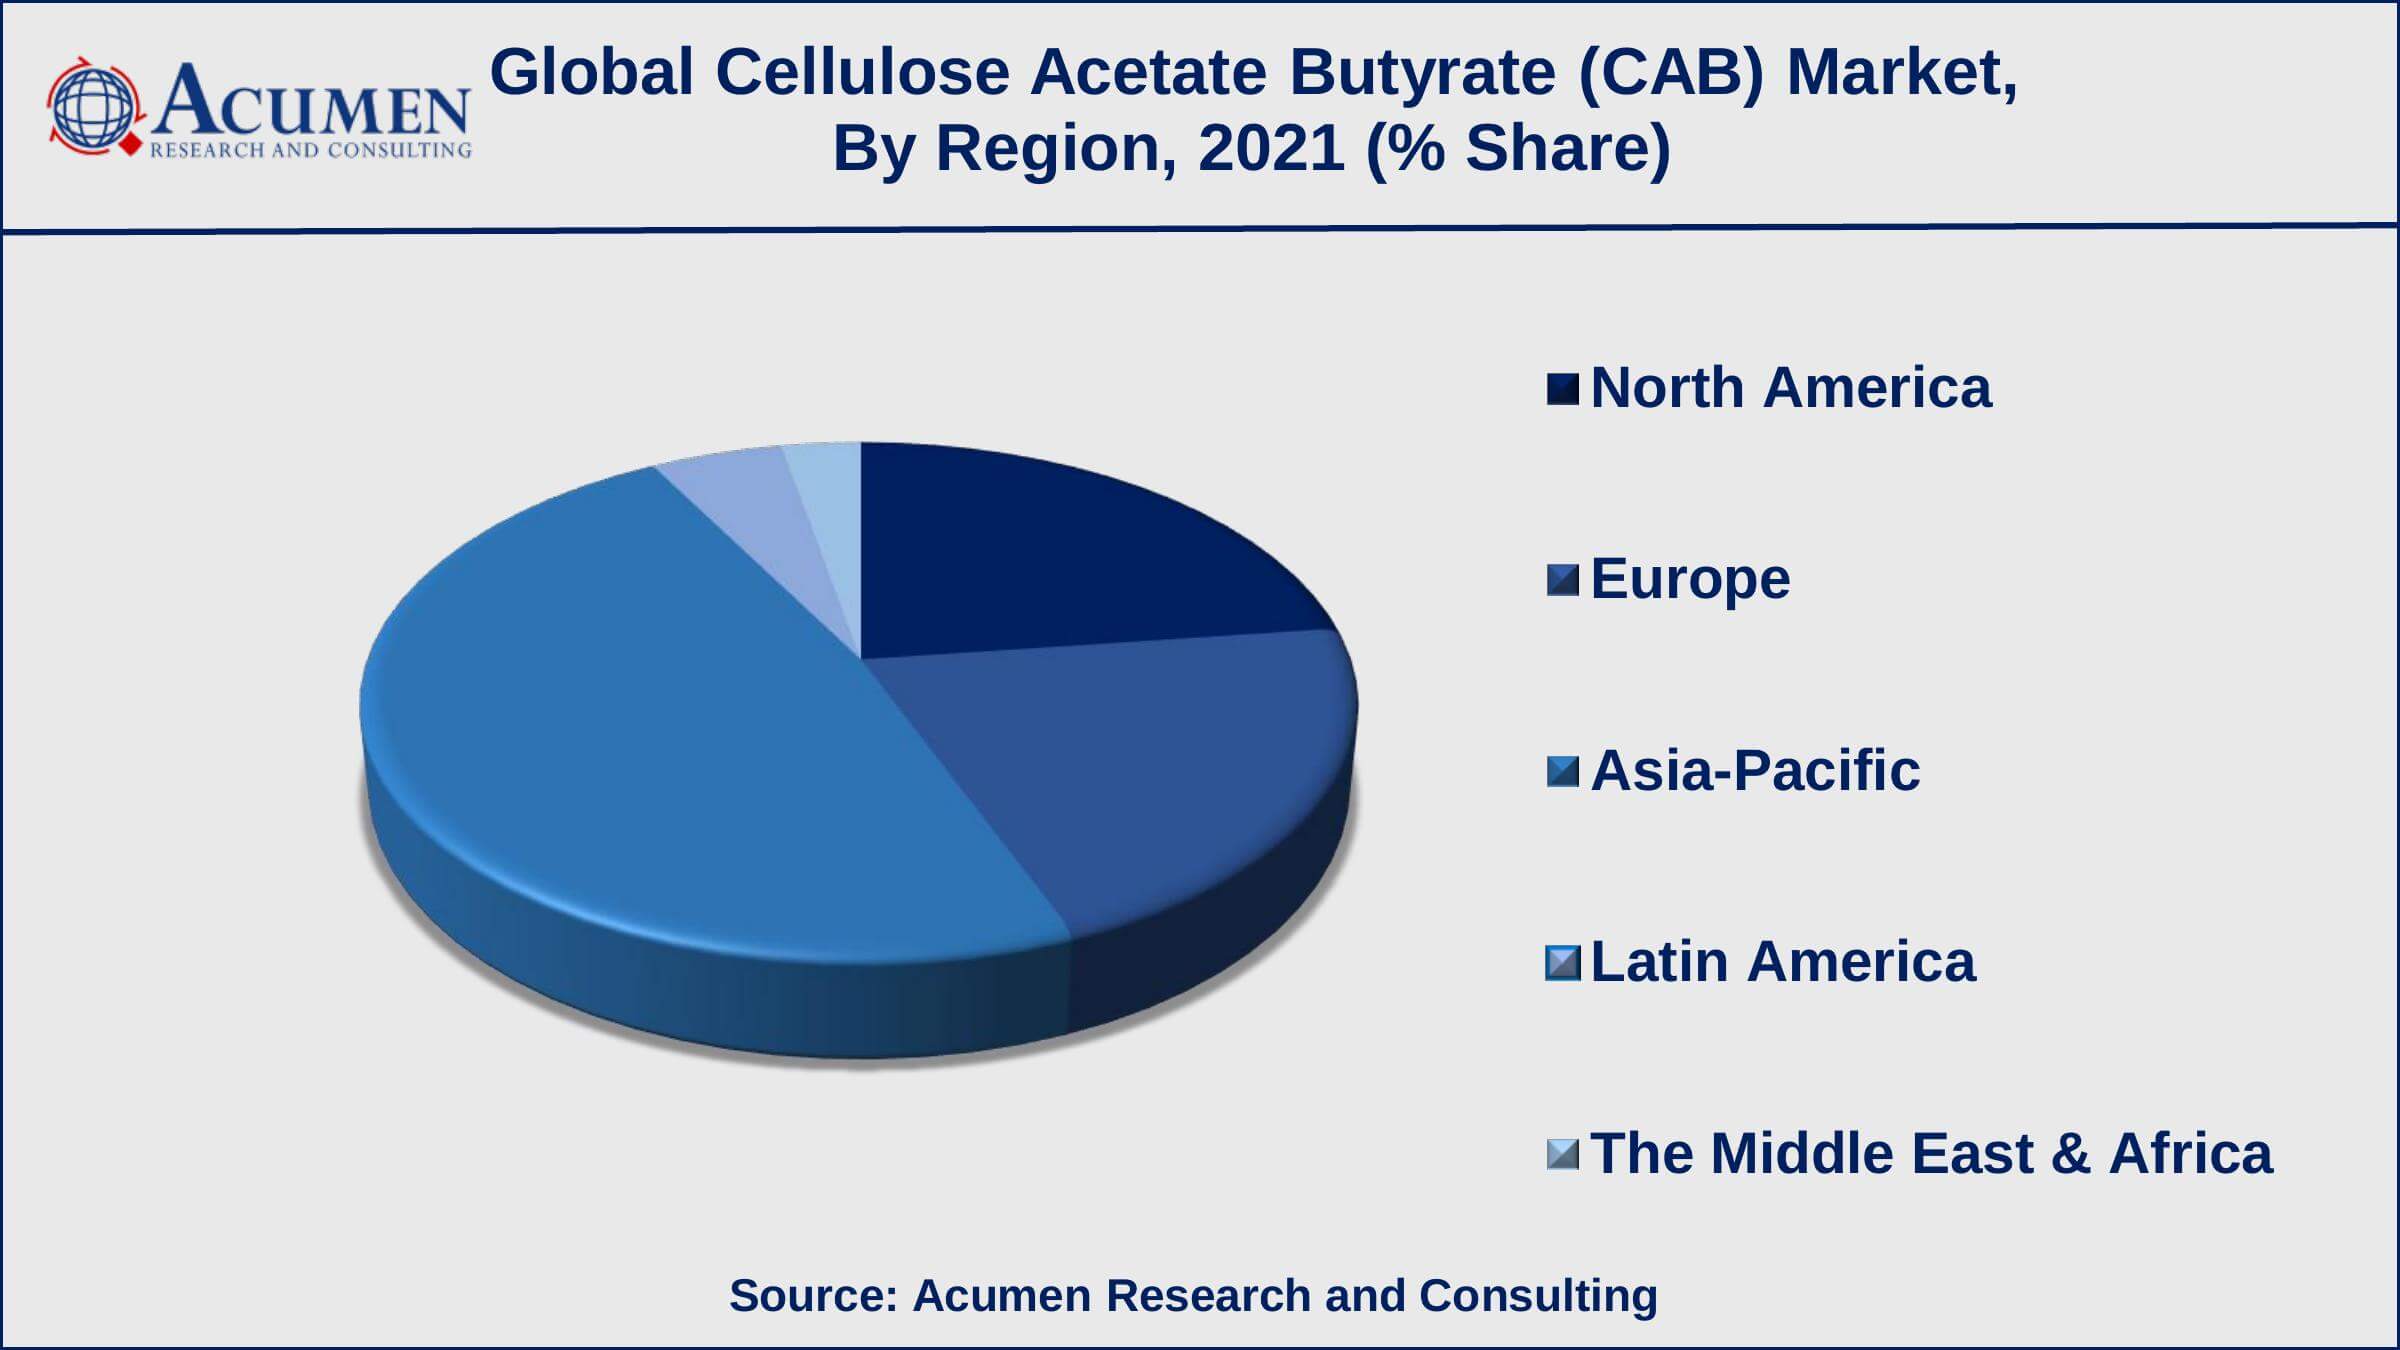 Growing chemical industry is a popular cellulose acetate butyrate (CAB) market trend that fuels the industry demand